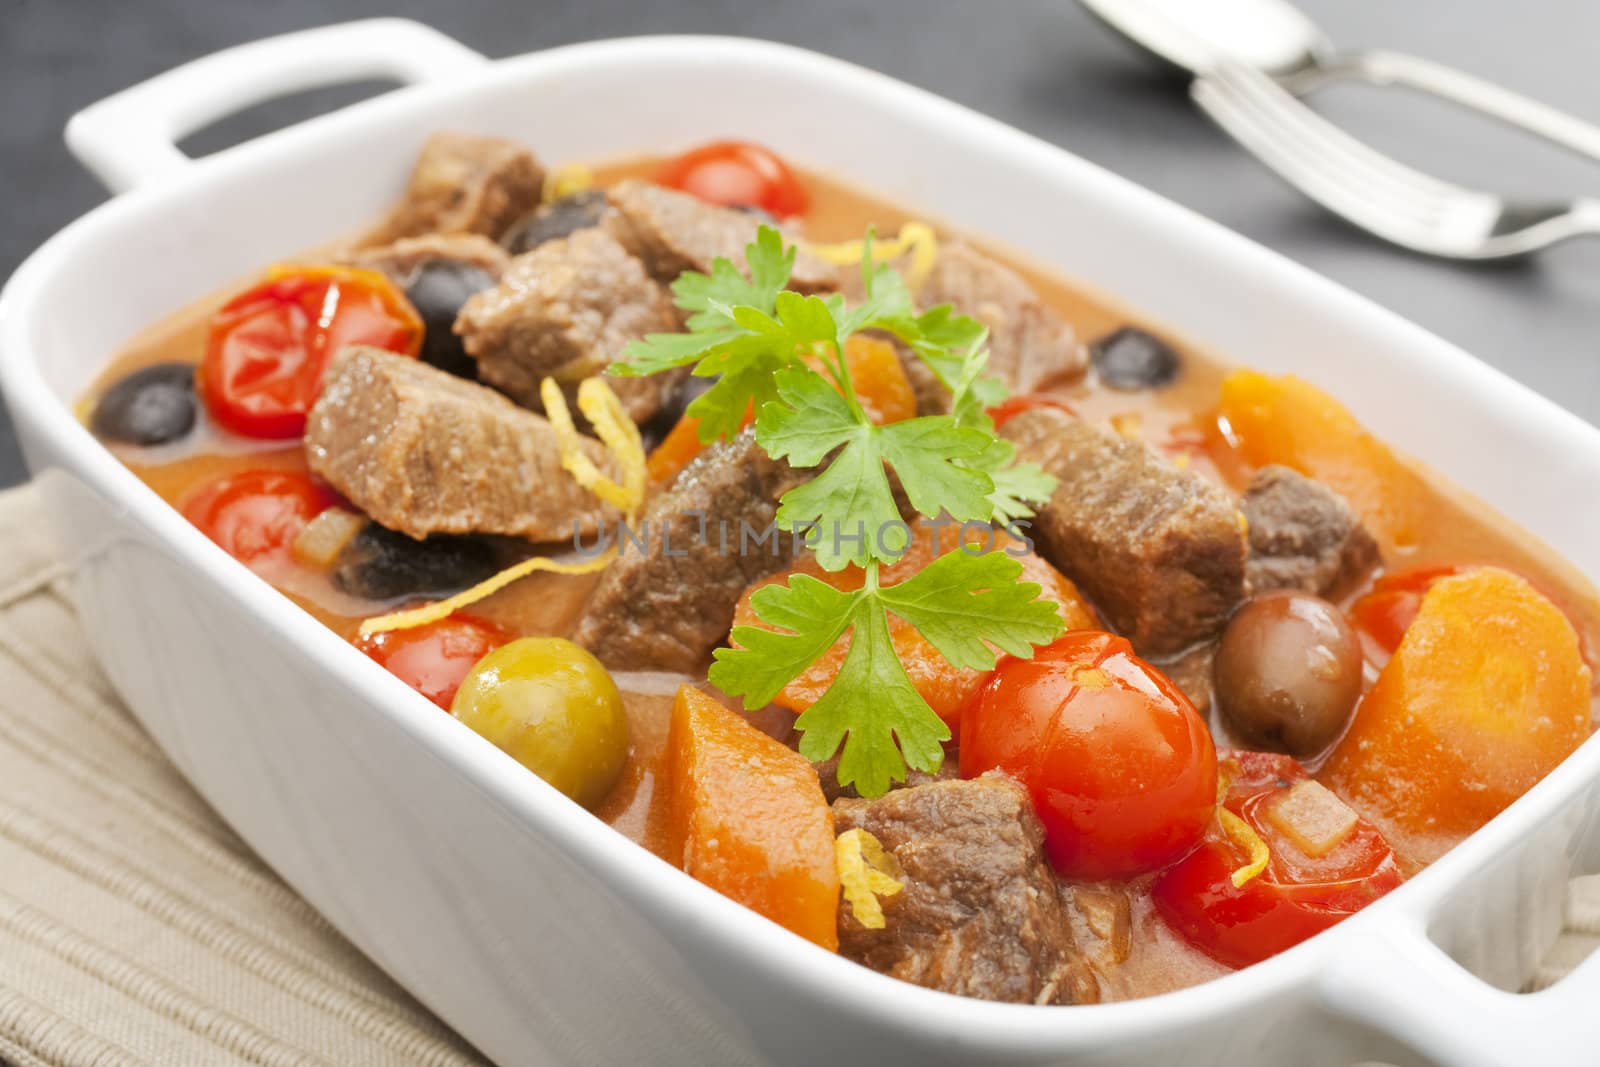 Mediterranean beef stew with olives, tomatoes and carrots, cooked in white wine.